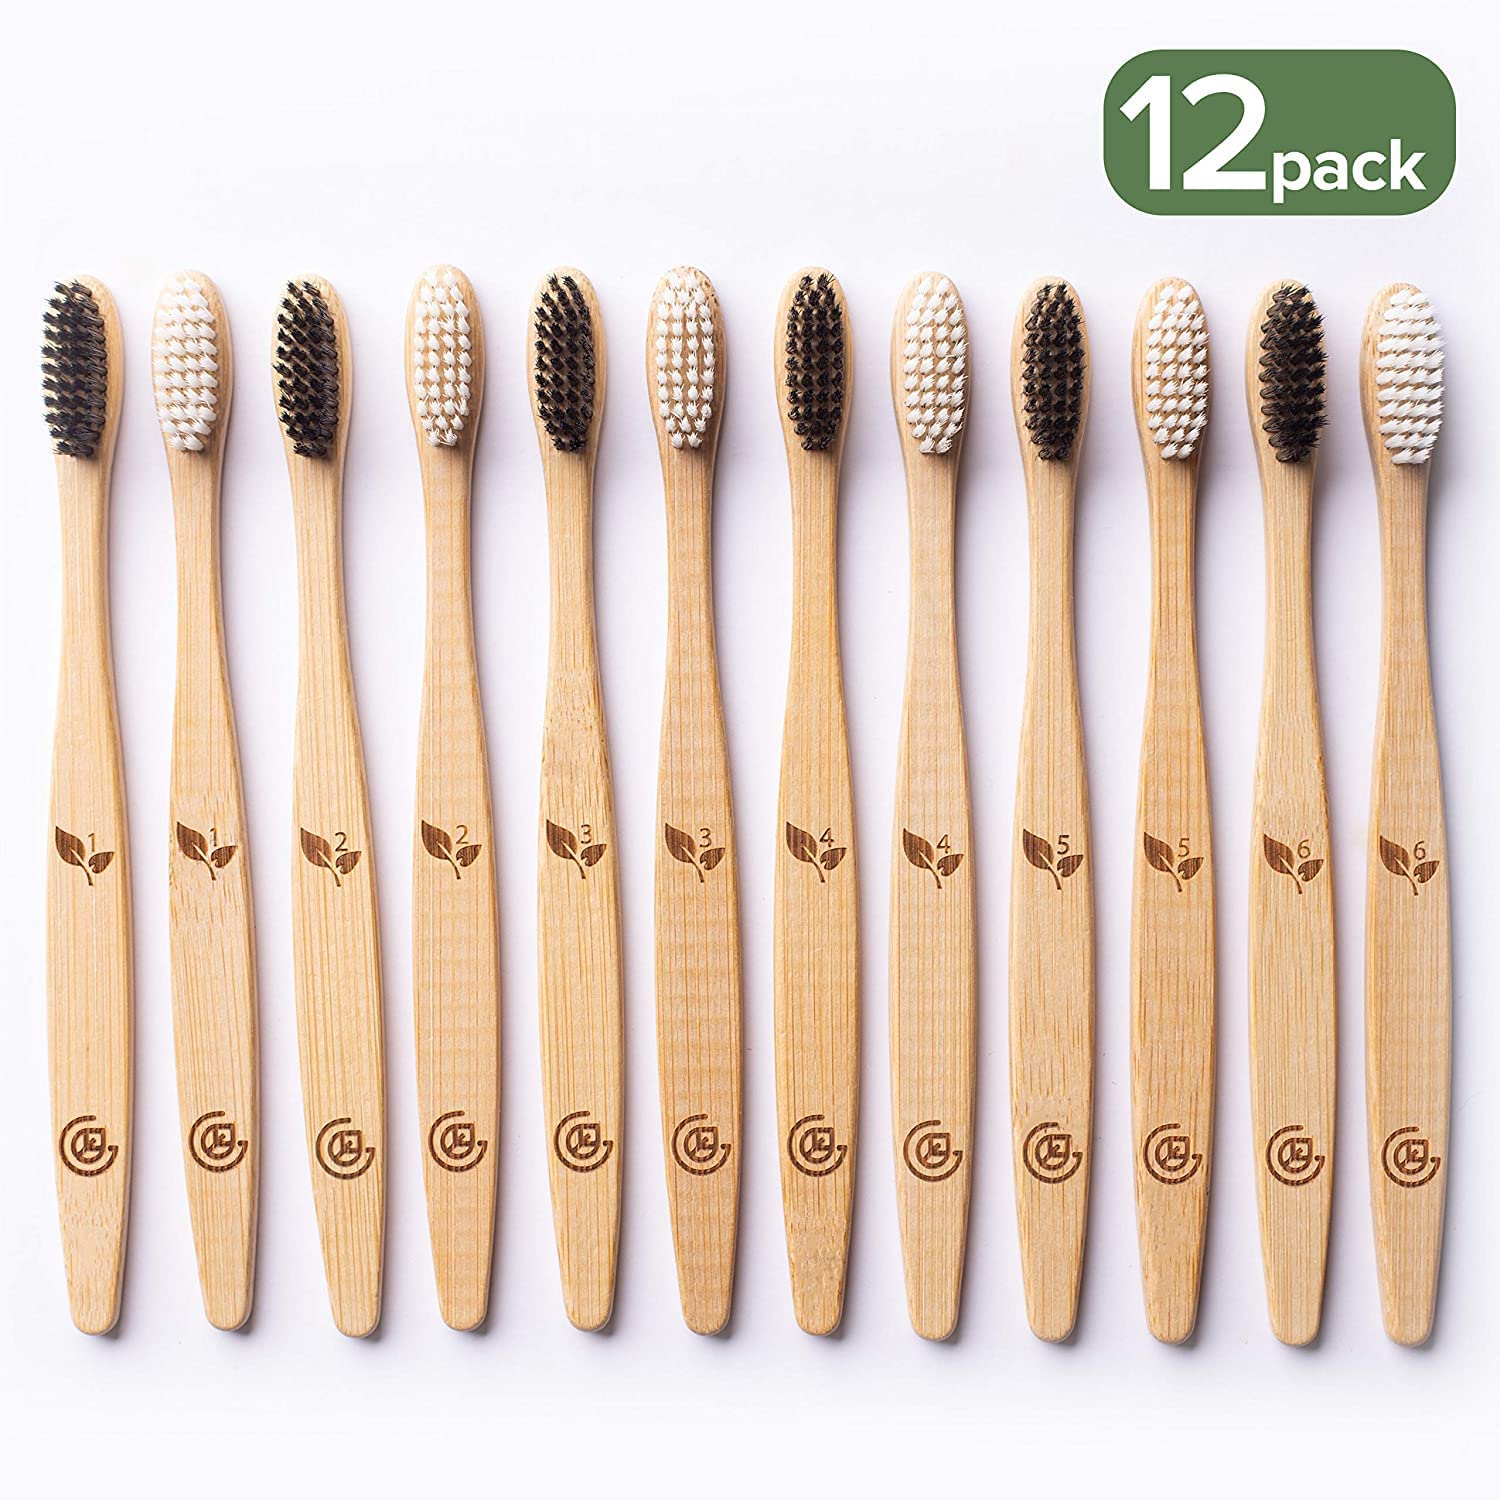 Bamboo Charcoal Toothbrushes Eco-Friendly & Sustainable (12 Pack)